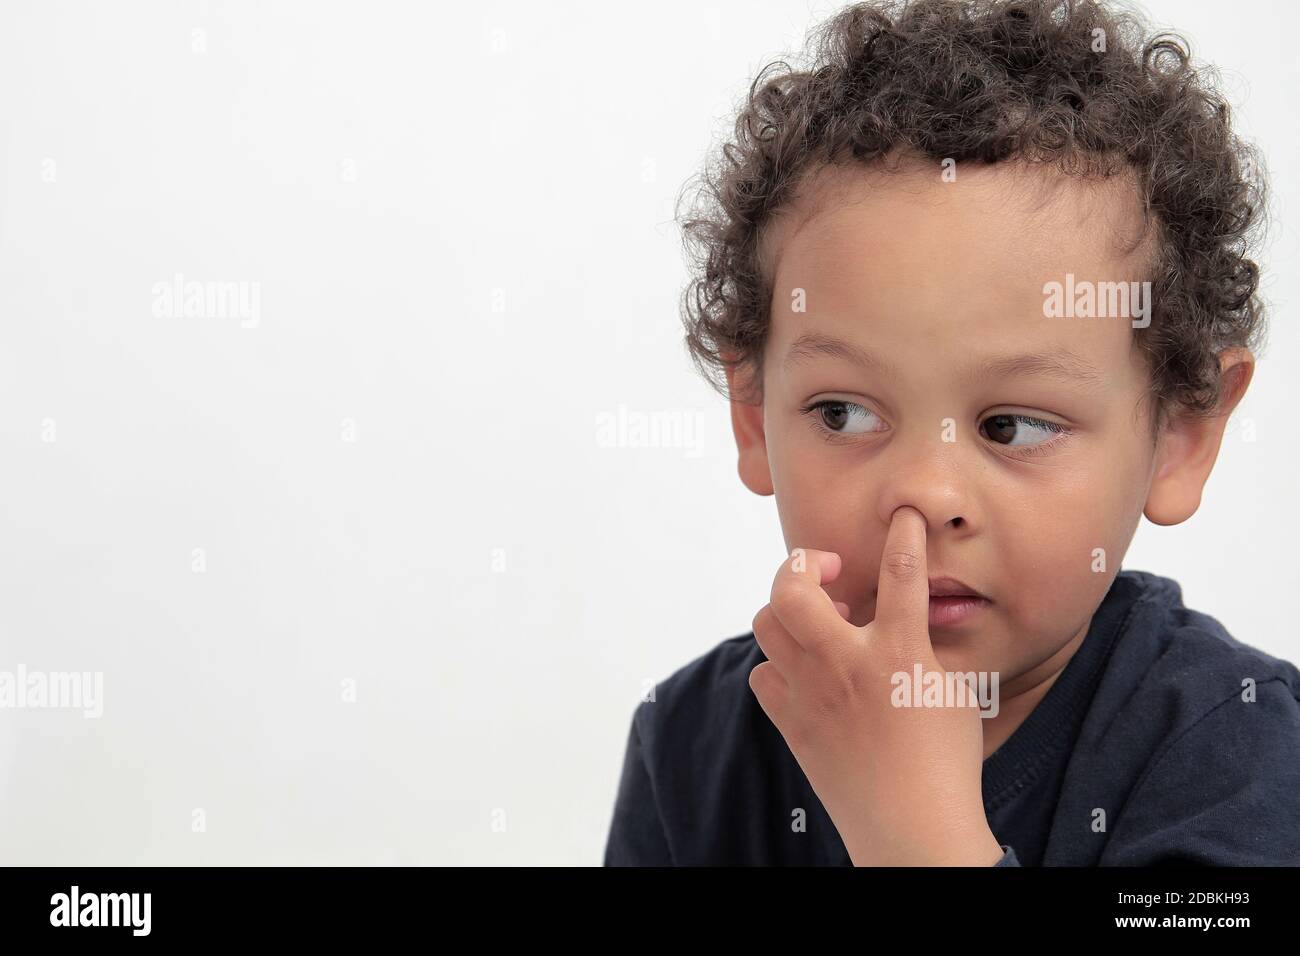 boy picking his nose with white background stock photo Stock Photo